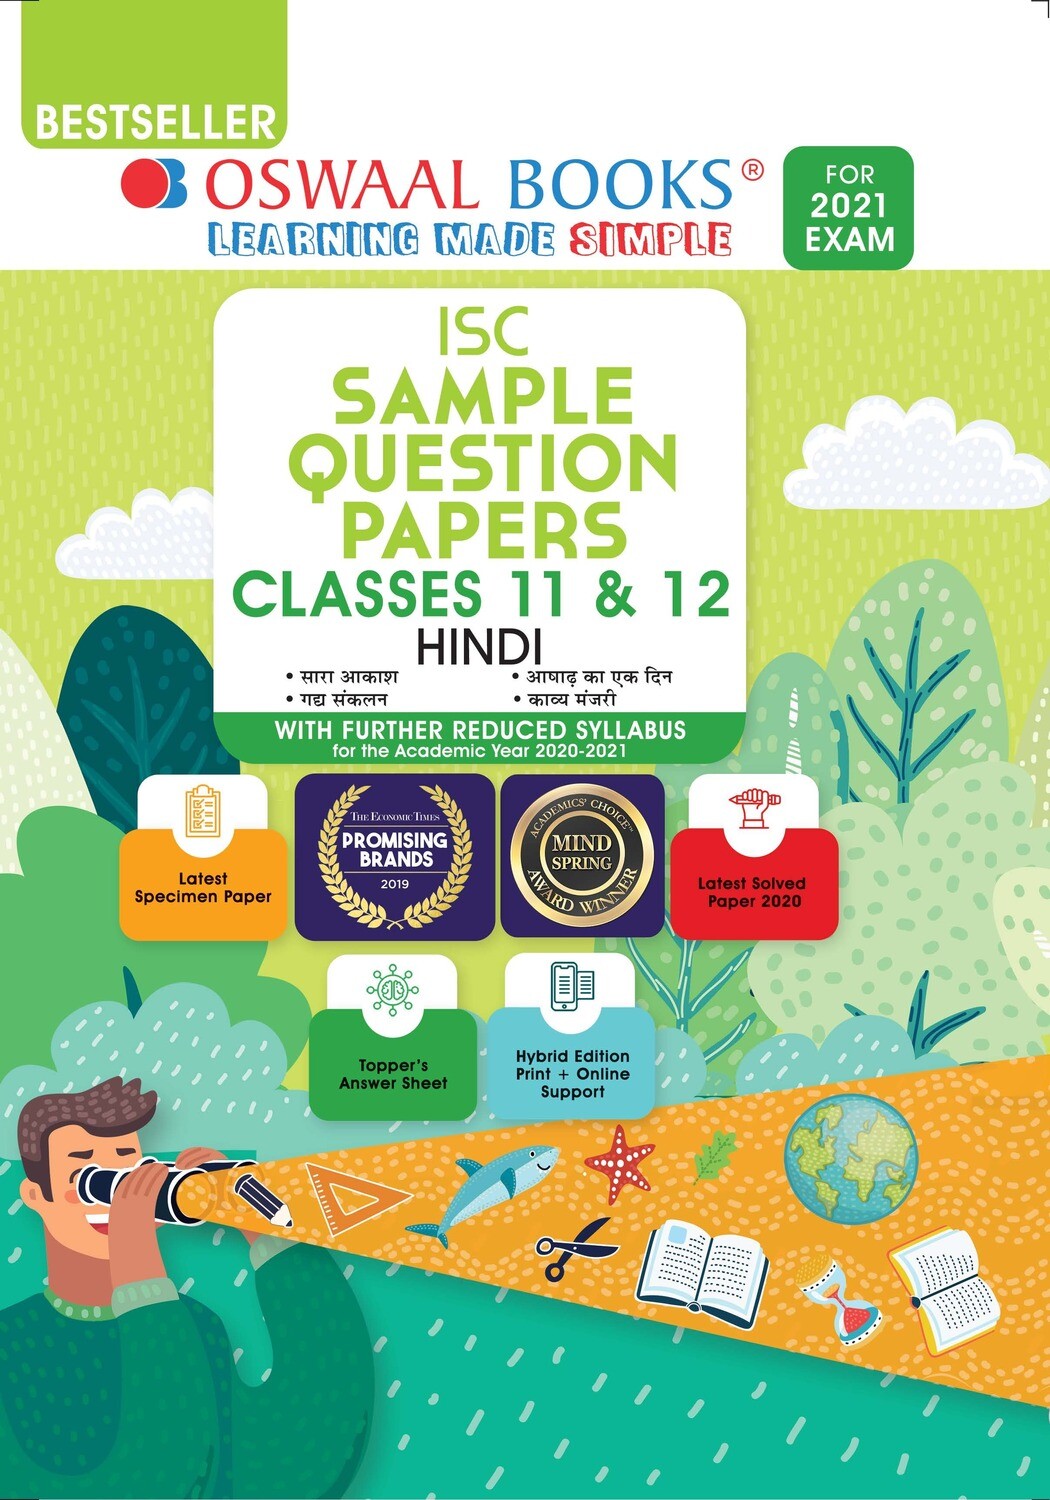 Buy e-book: Oswaal ISC Sample Question Papers Class 12 Hindi Book (For 2021 Exam): 9789354233074